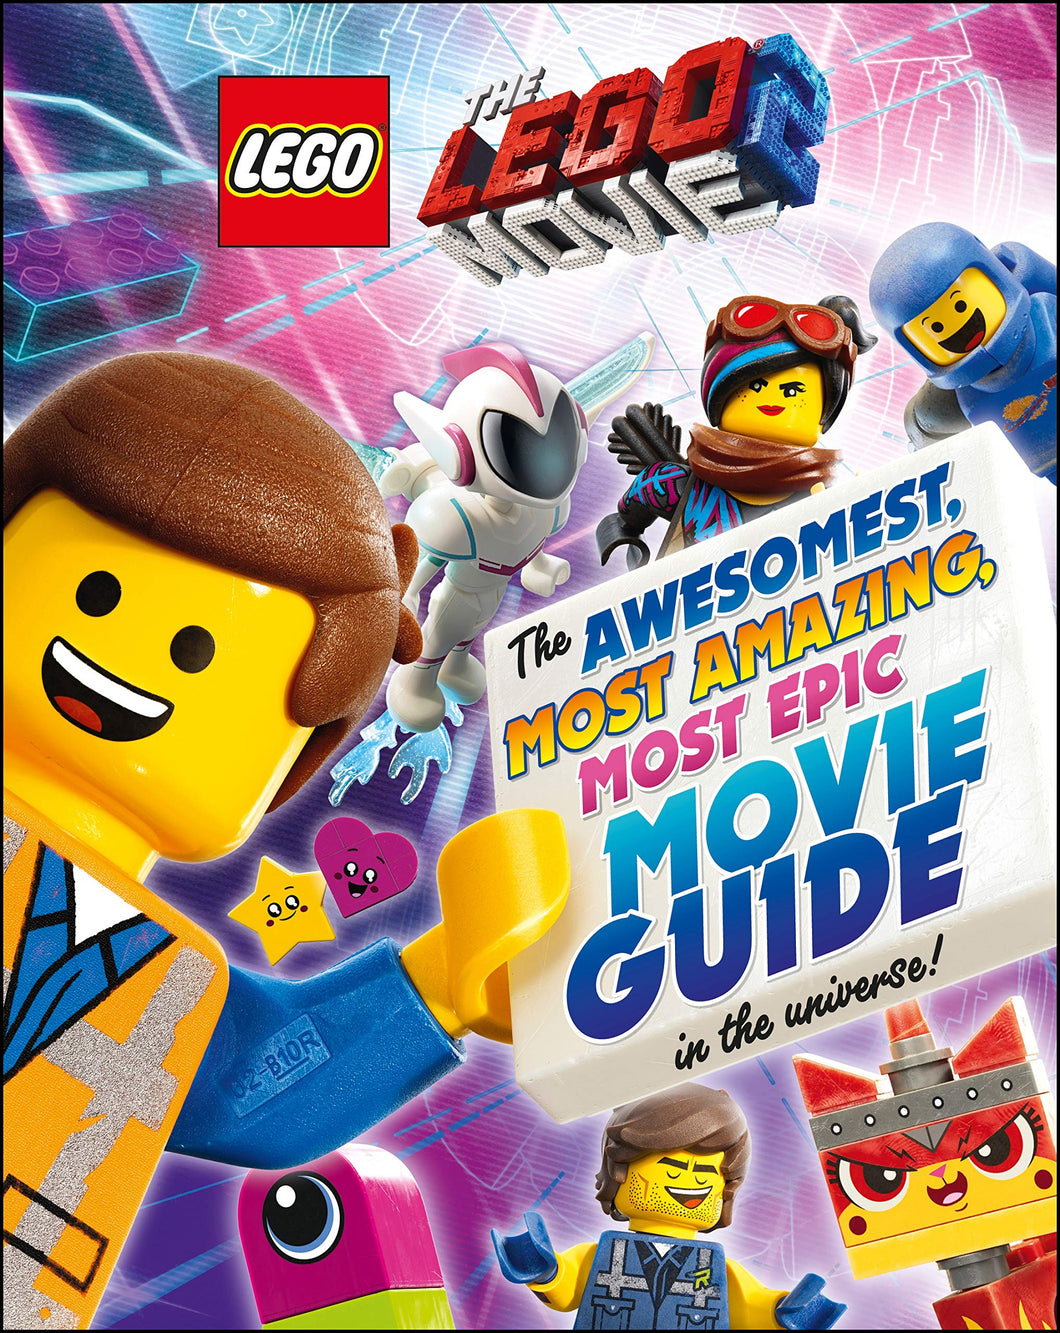 THE LEGO® MOVIE 2™: The Awesomest, Most Amazing, Most Epic Movie Guide in the Universe!